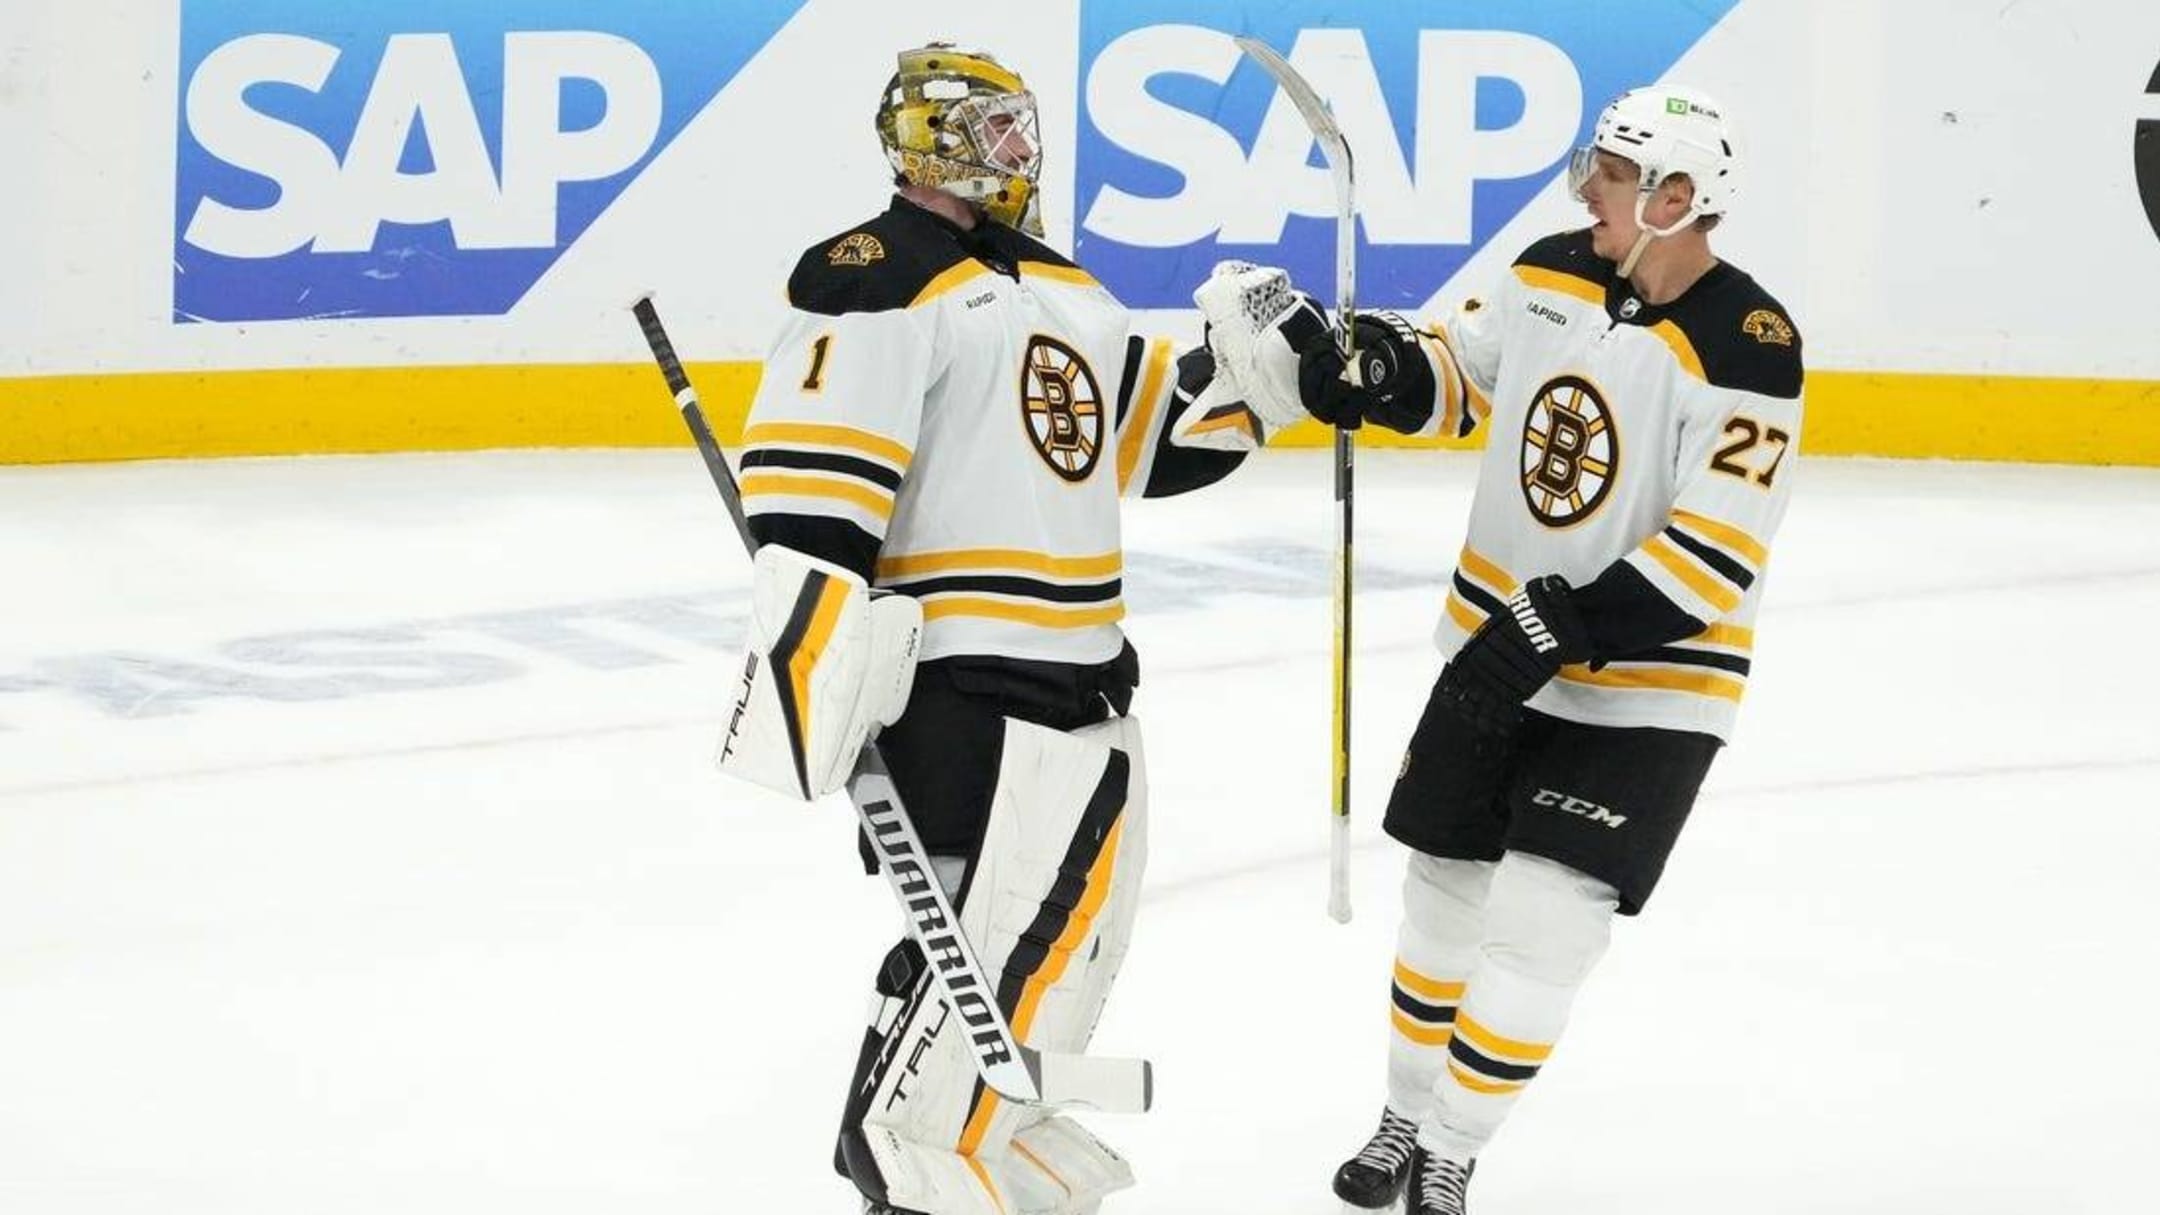 How Good Do These Boston Bruins Look, On and OFF The Ice?